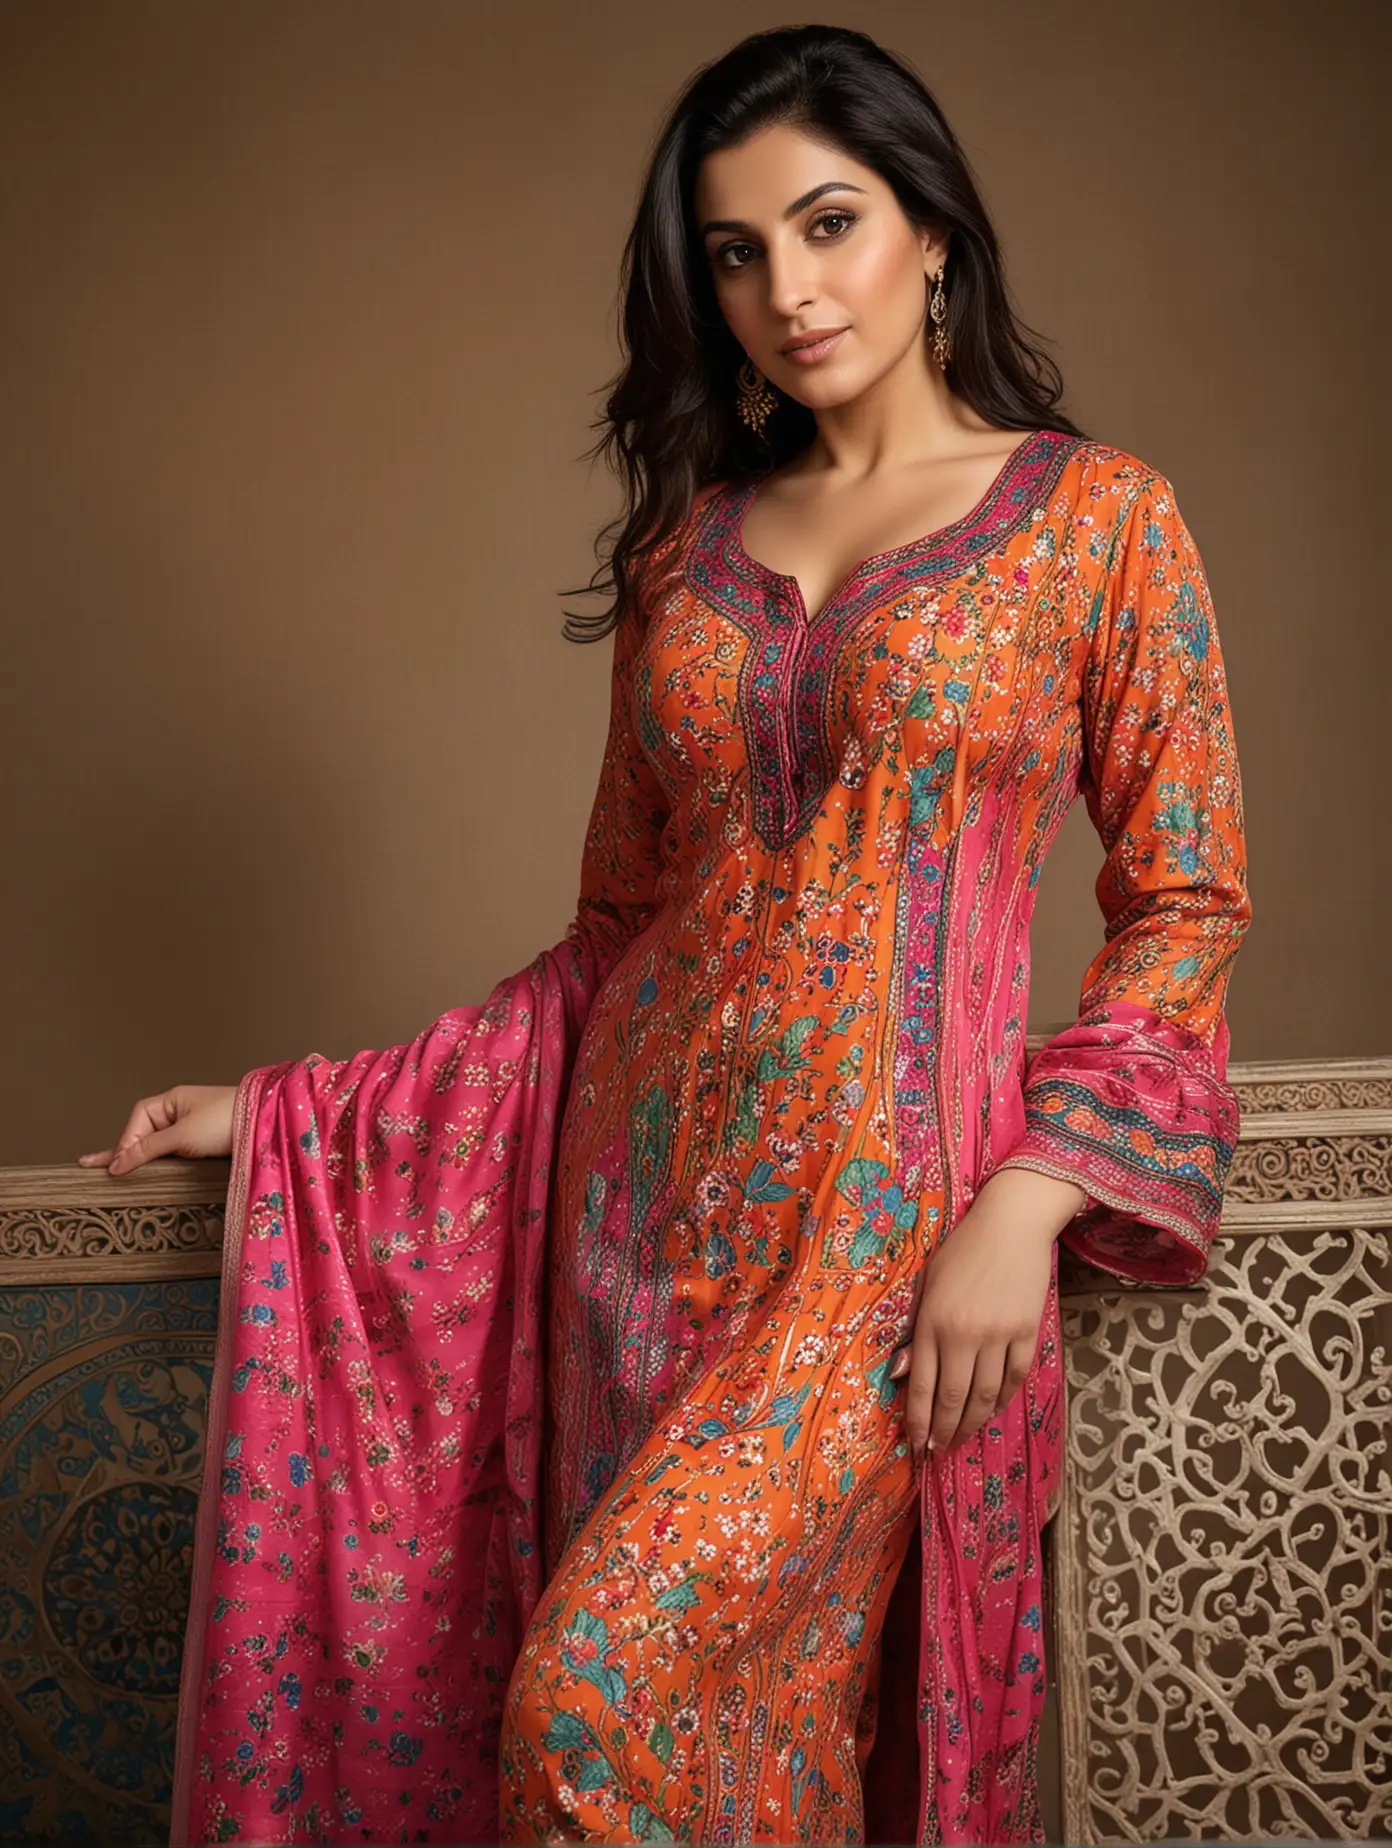 A stunningly seductive 50 year old Iranian woman with an alluring hourglass figure, clad in a traditional yet sensual colourful salwar kameez. Her voluptuous 38DD breasts, which seem to defy gravity, are beautifully accentuated by the fitted top of the garment, drawing the viewer's attention like a magnet. Her fingers are not visible